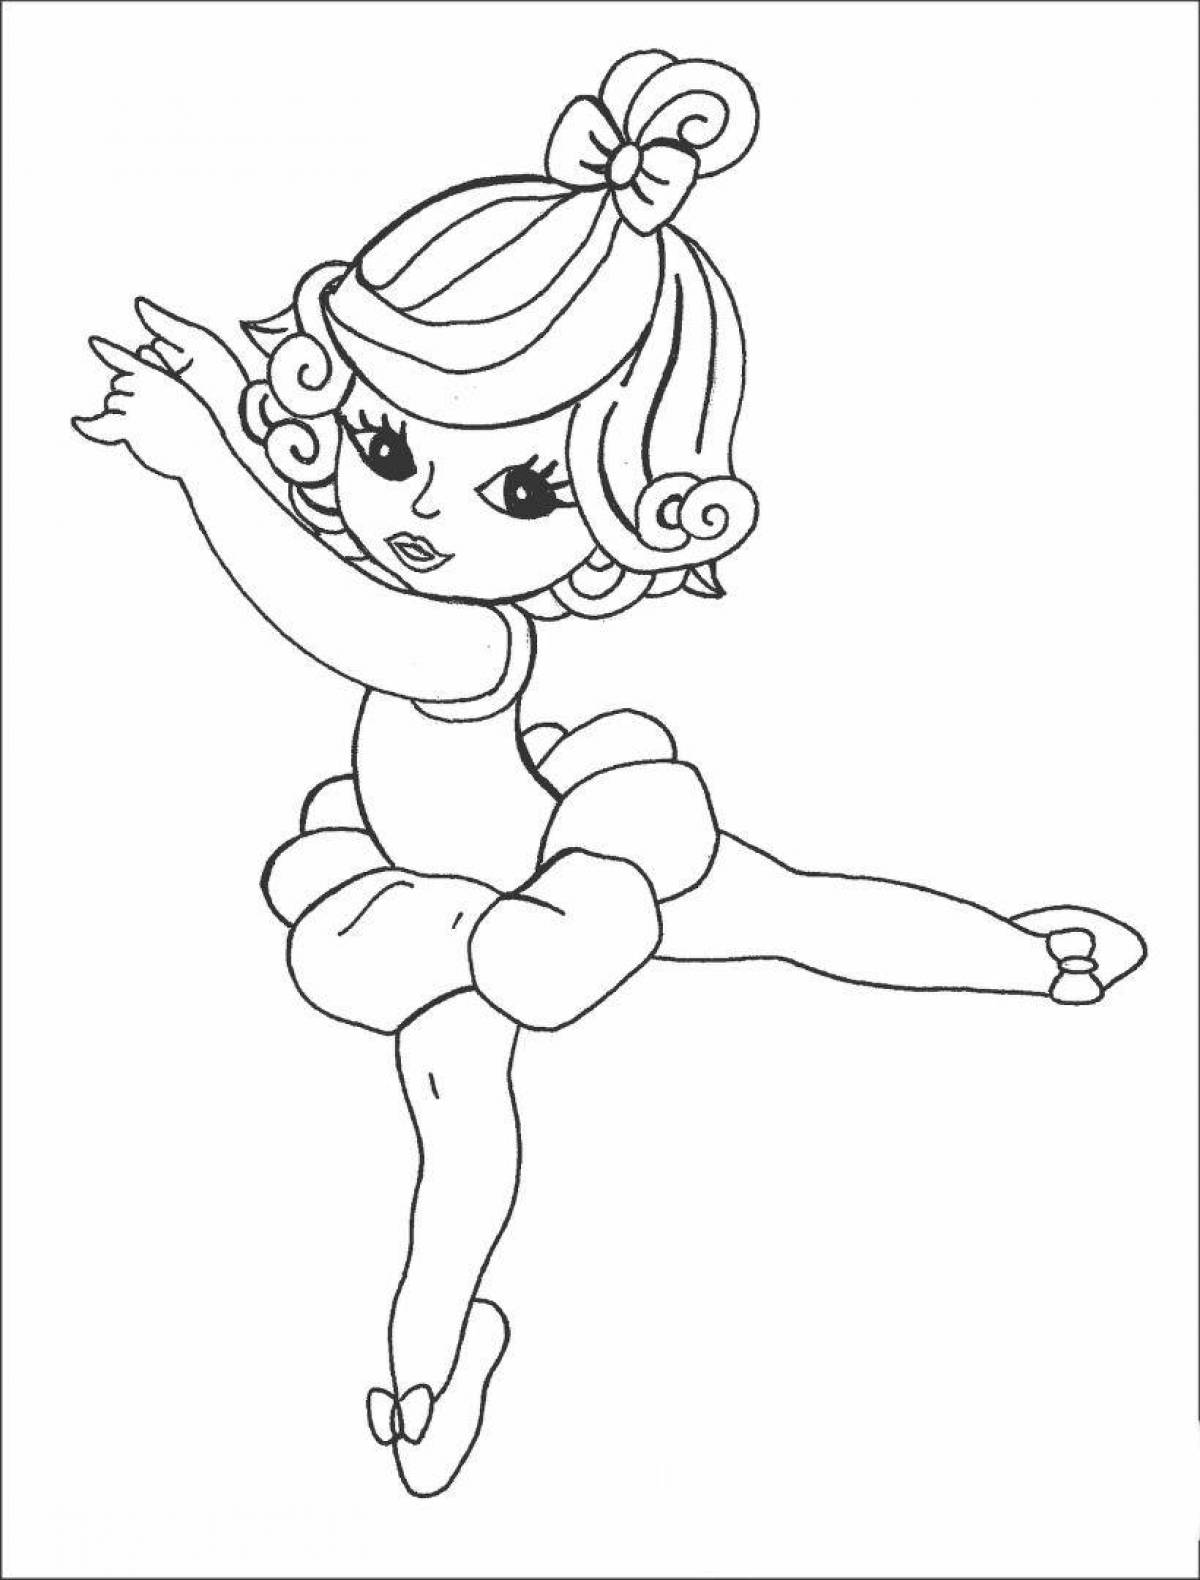 Coloring page cheerful dancing girl